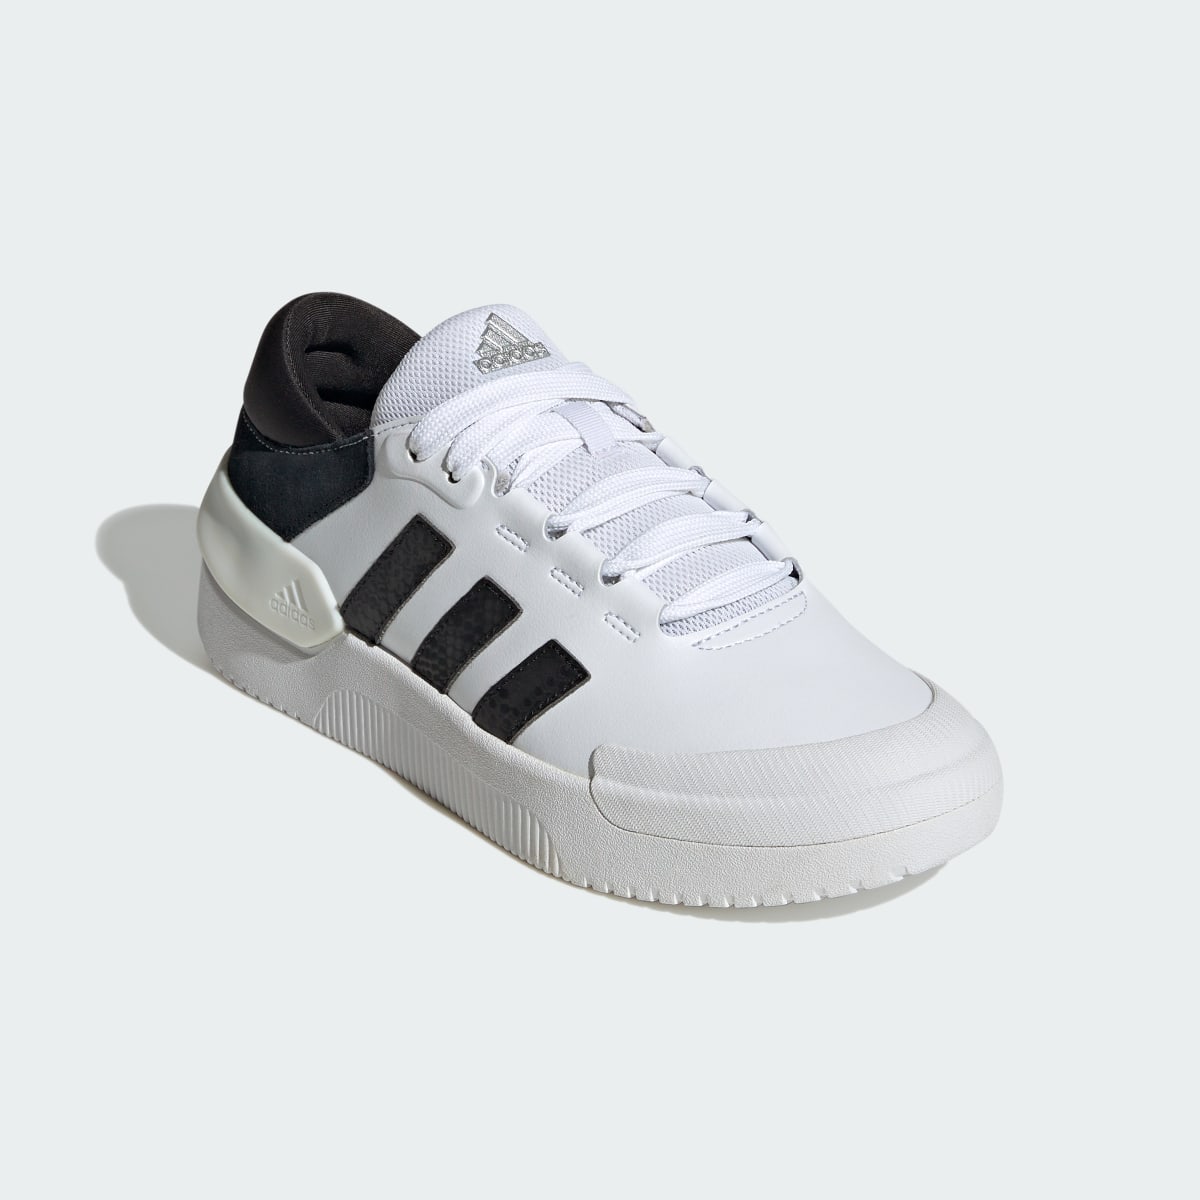 Adidas Court Funk Shoes. 5